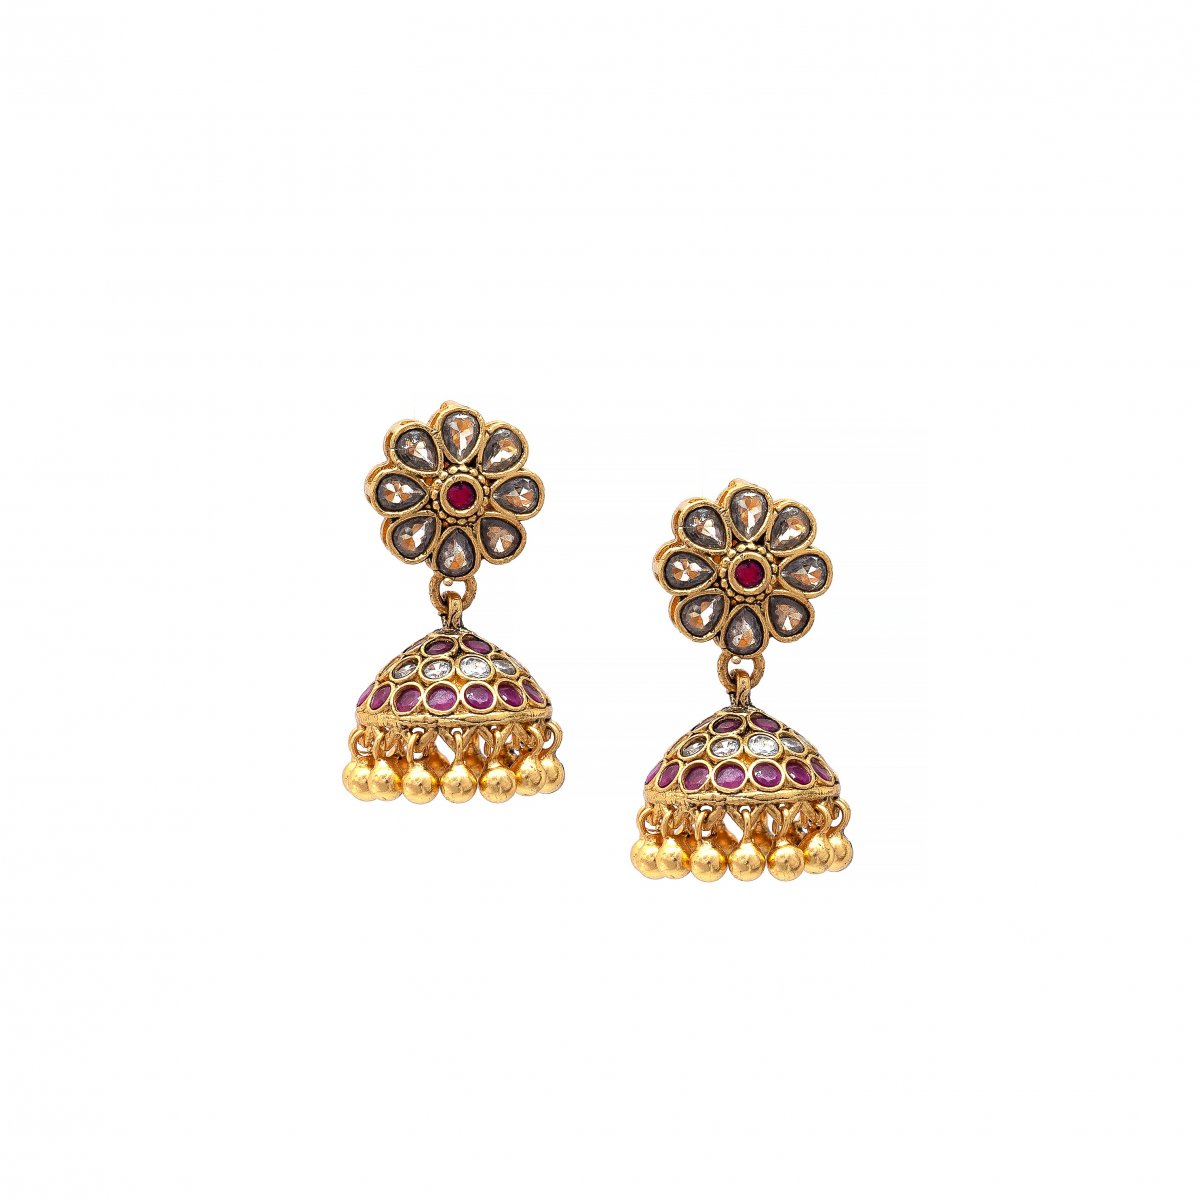 92.5 SILVER GOLD POLISHED ROUND NAGAS JHUMKI FOR GIRLS